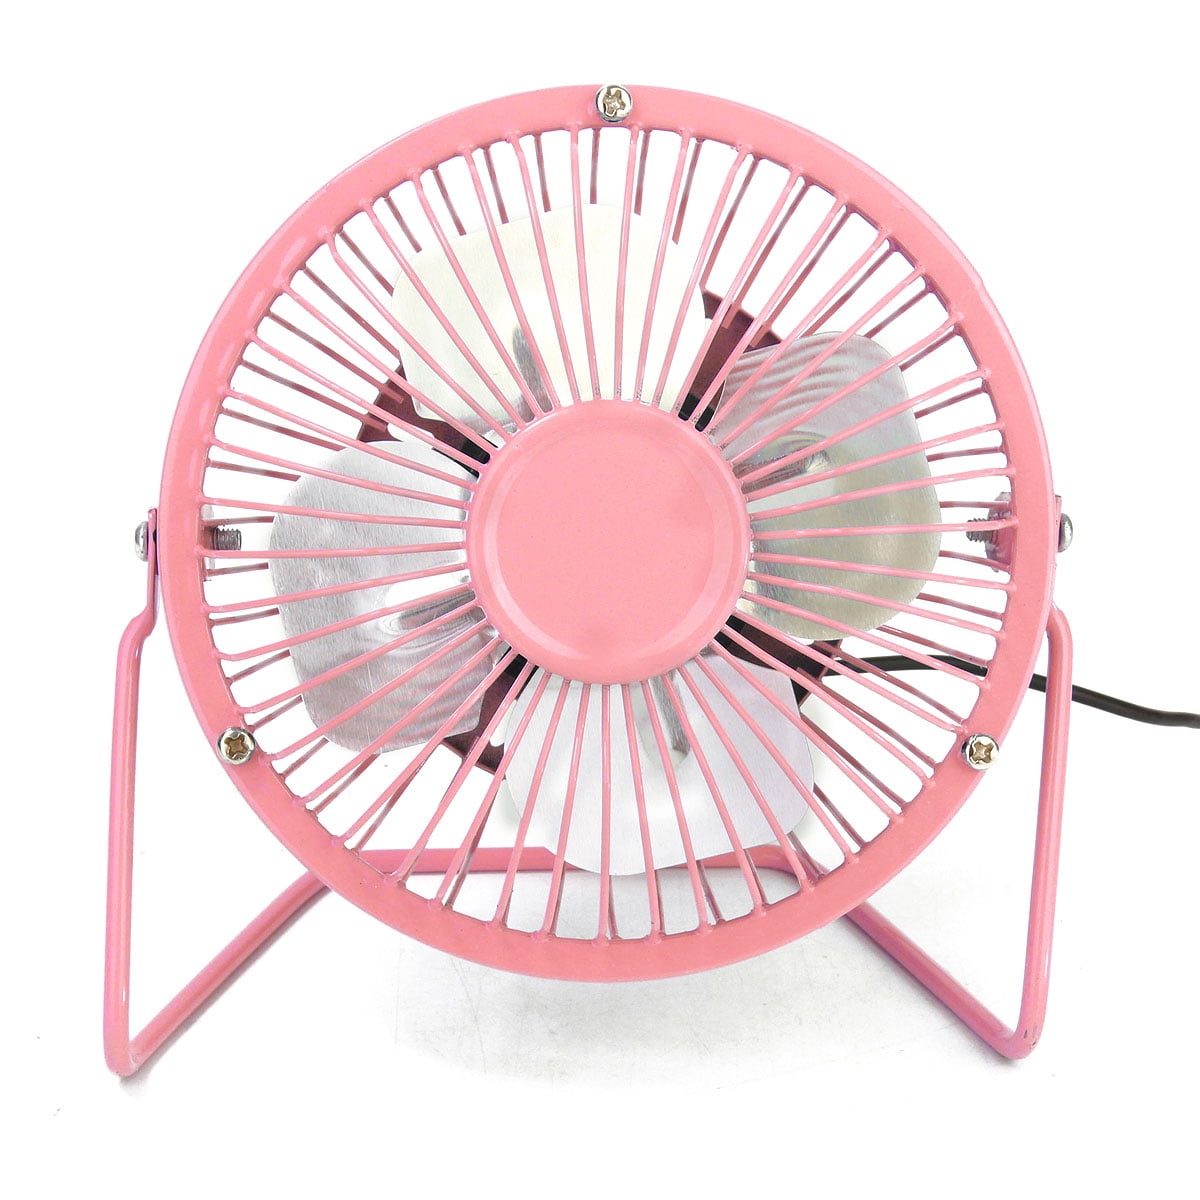 Office USB Fan Laptops and Notebooks Fooxon 4 inch Mini USB Desk Fan 360° Rotation Quiet Cooling Fan with Metal Shell and Aluminium Blades for Home 